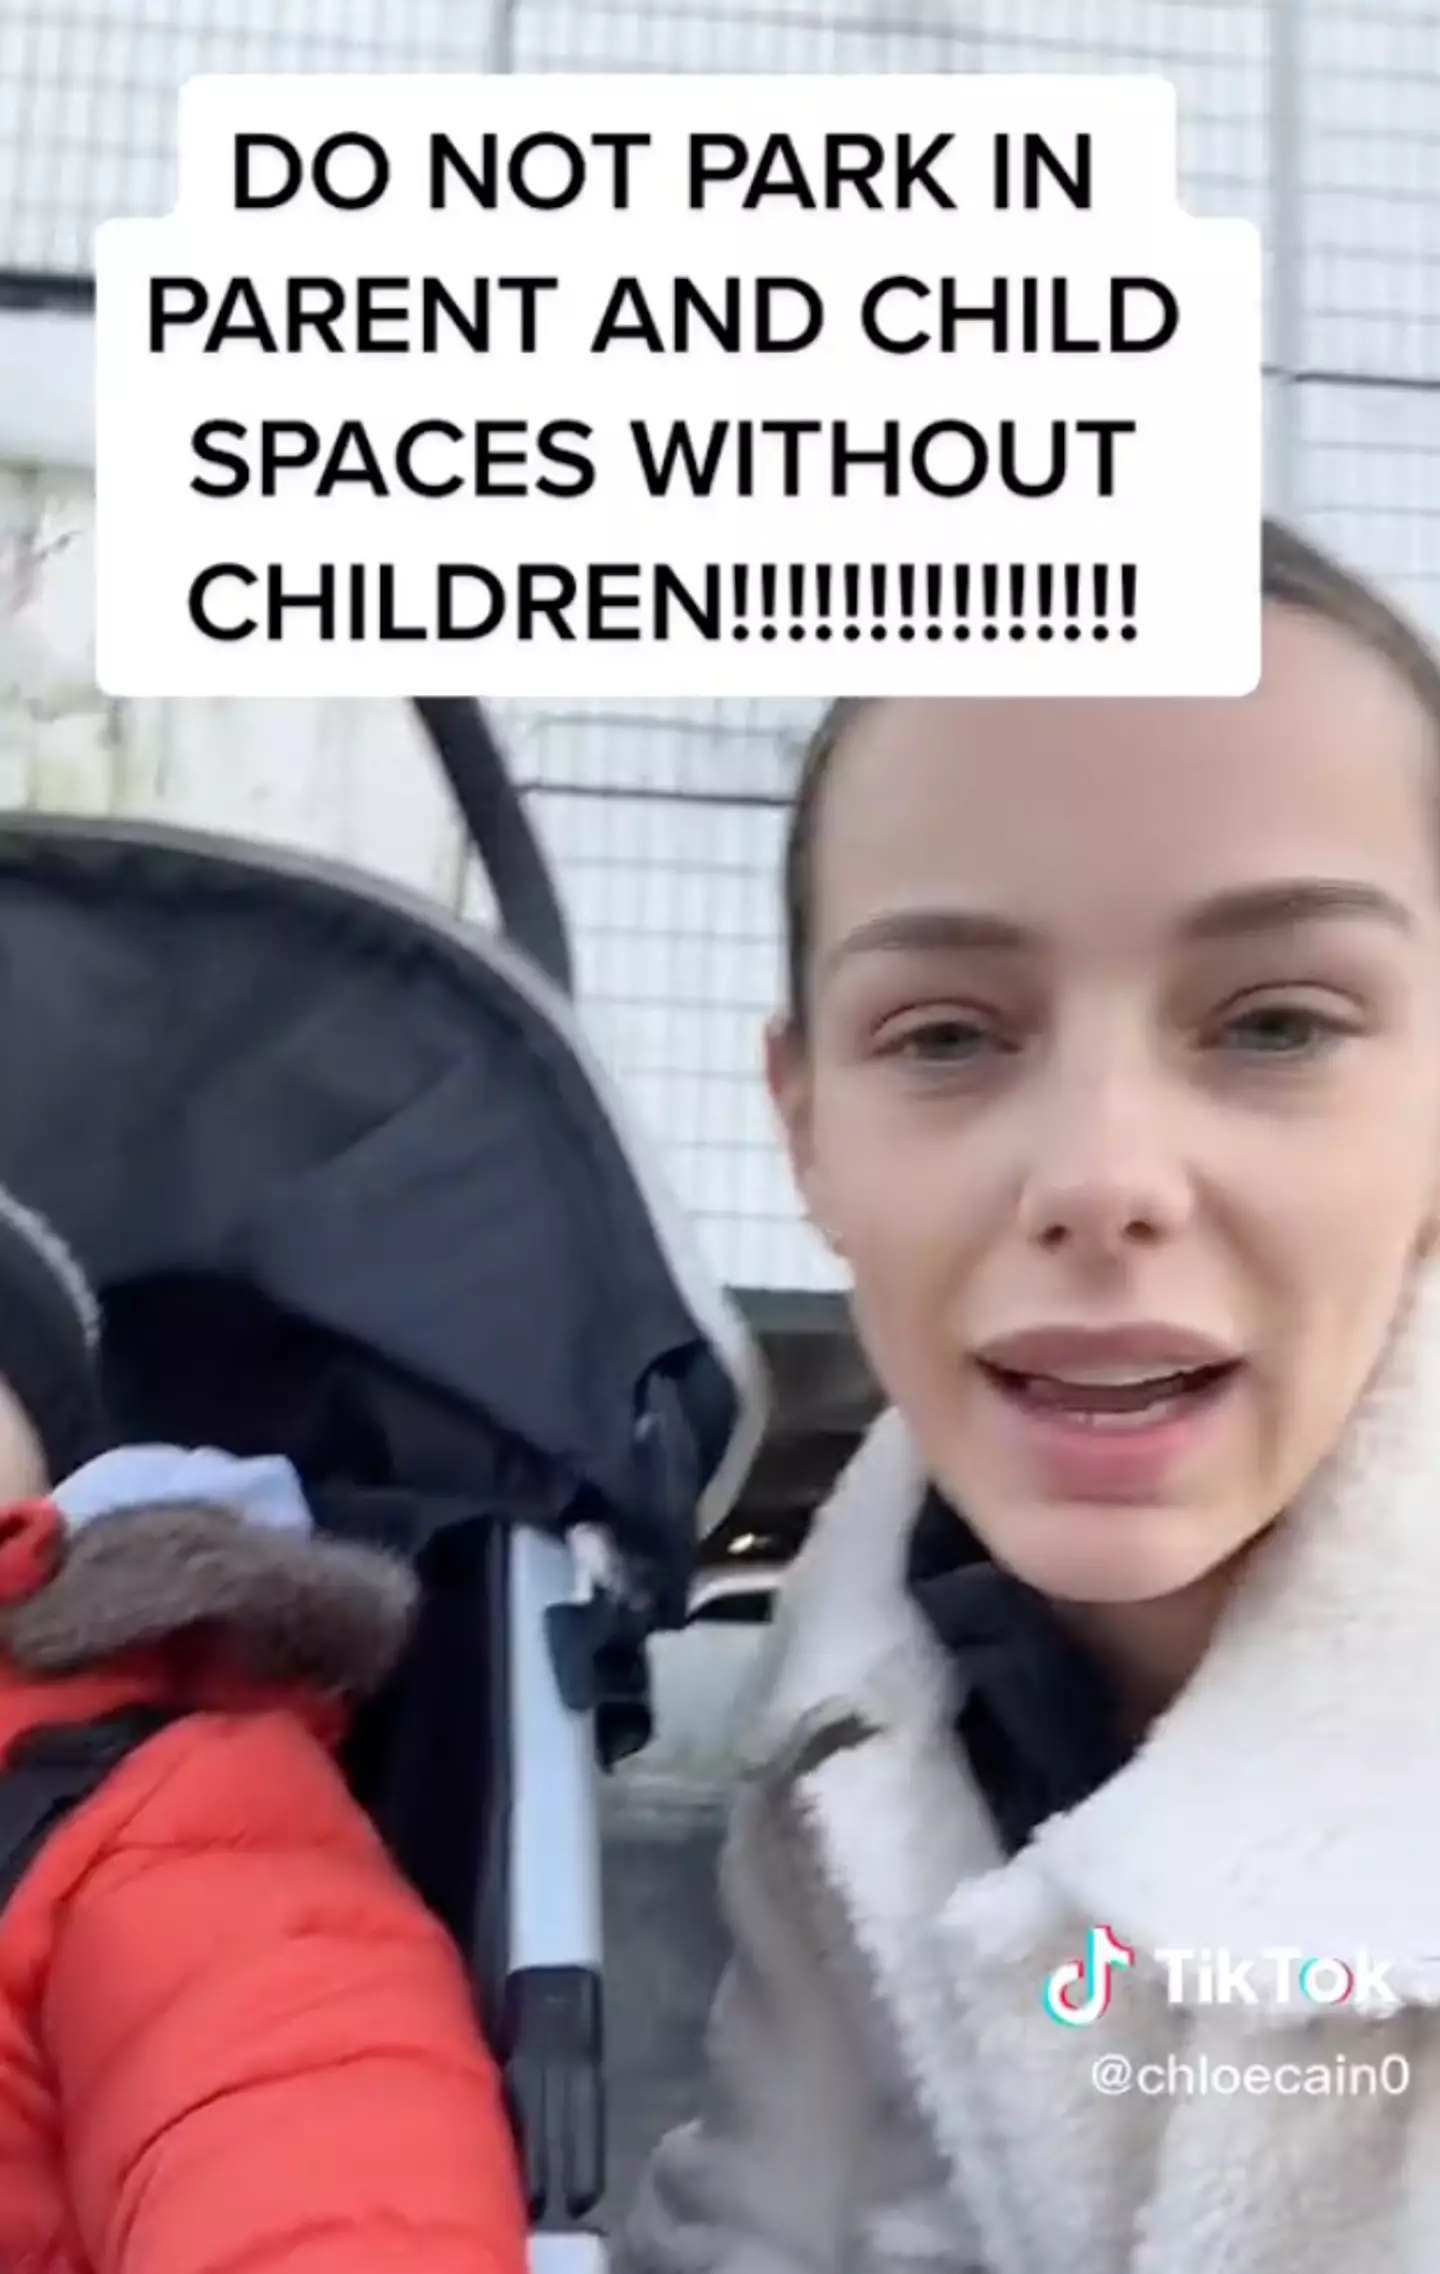 The mum called out drivers who park in parent and child spaces.